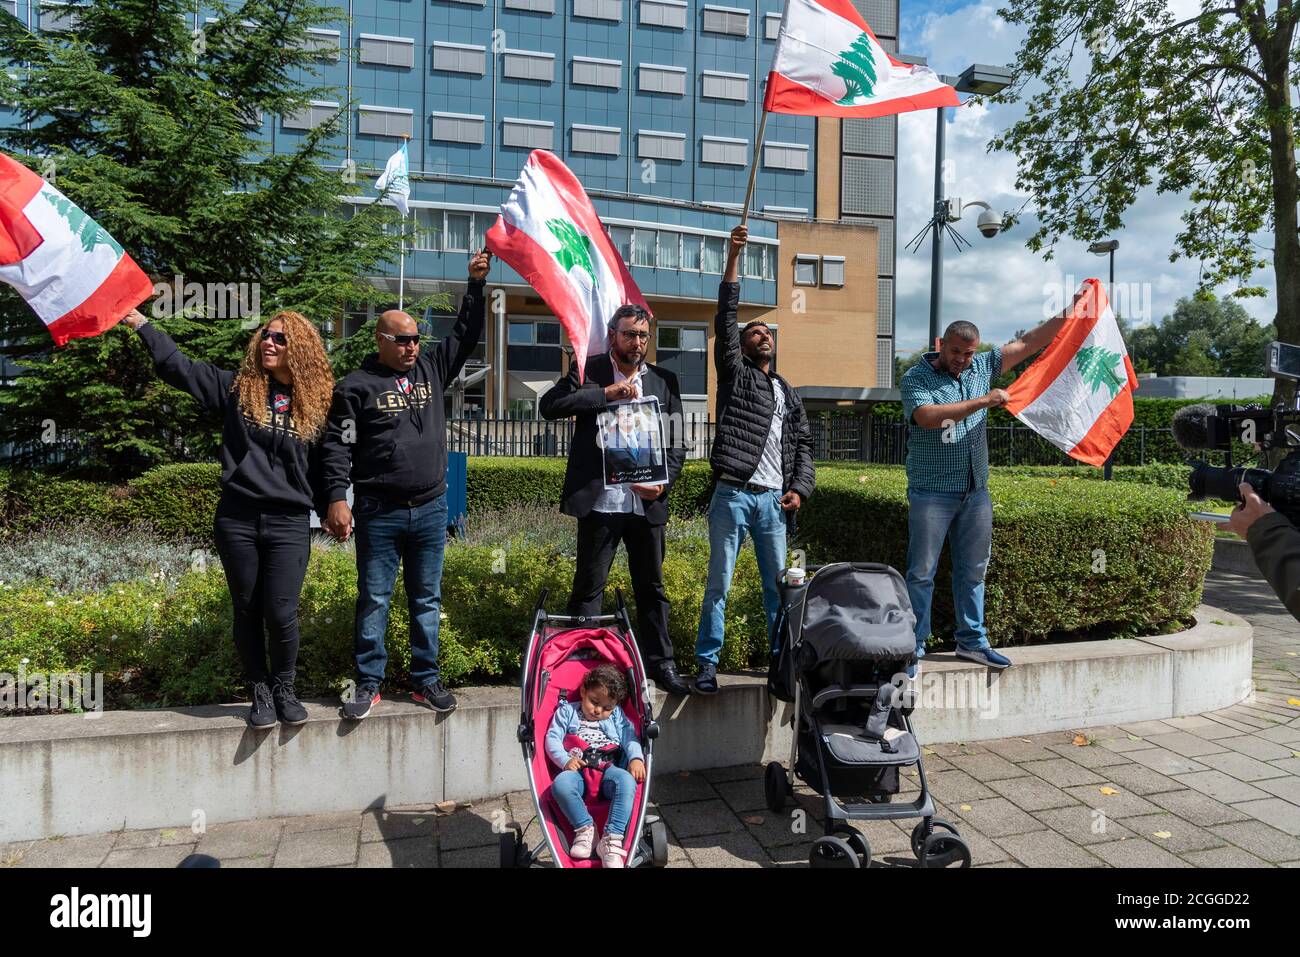 LEIDSCHENDAM, 18 August 2020 - Groupe of protester, demonstration, in front the Special Tribunal for Lebanon at the day of the judgment, Netherlands Stock Photo